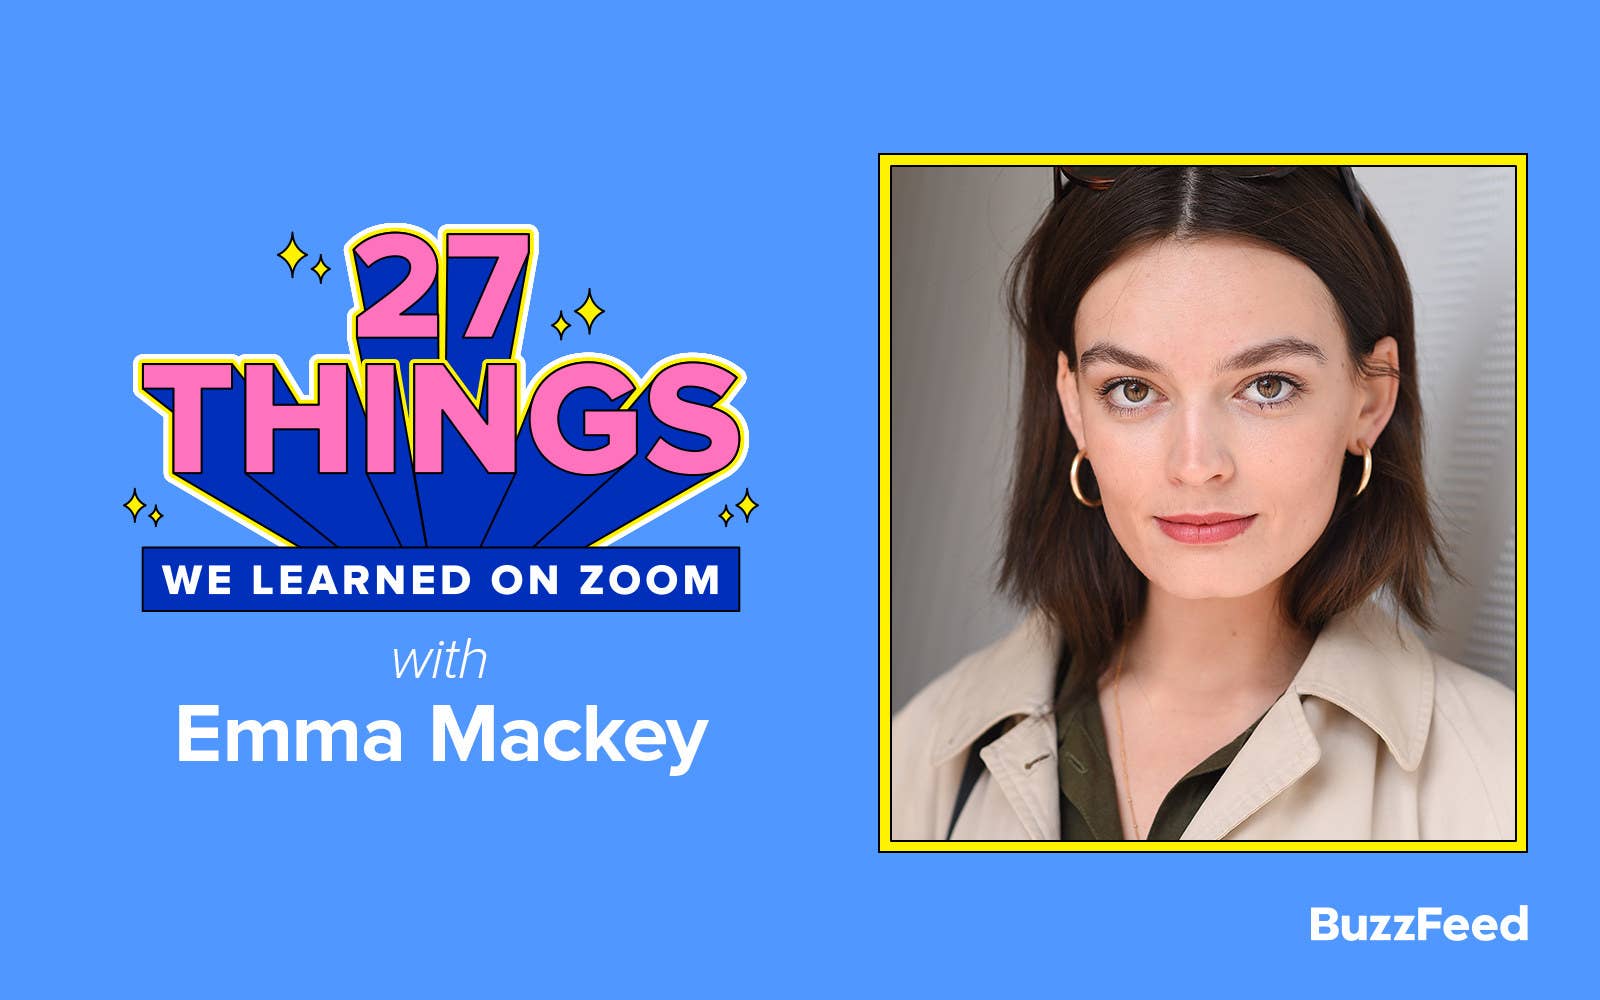 A header reading, &quot;27 things we learned on Zoom with Emma Mackey&quot;